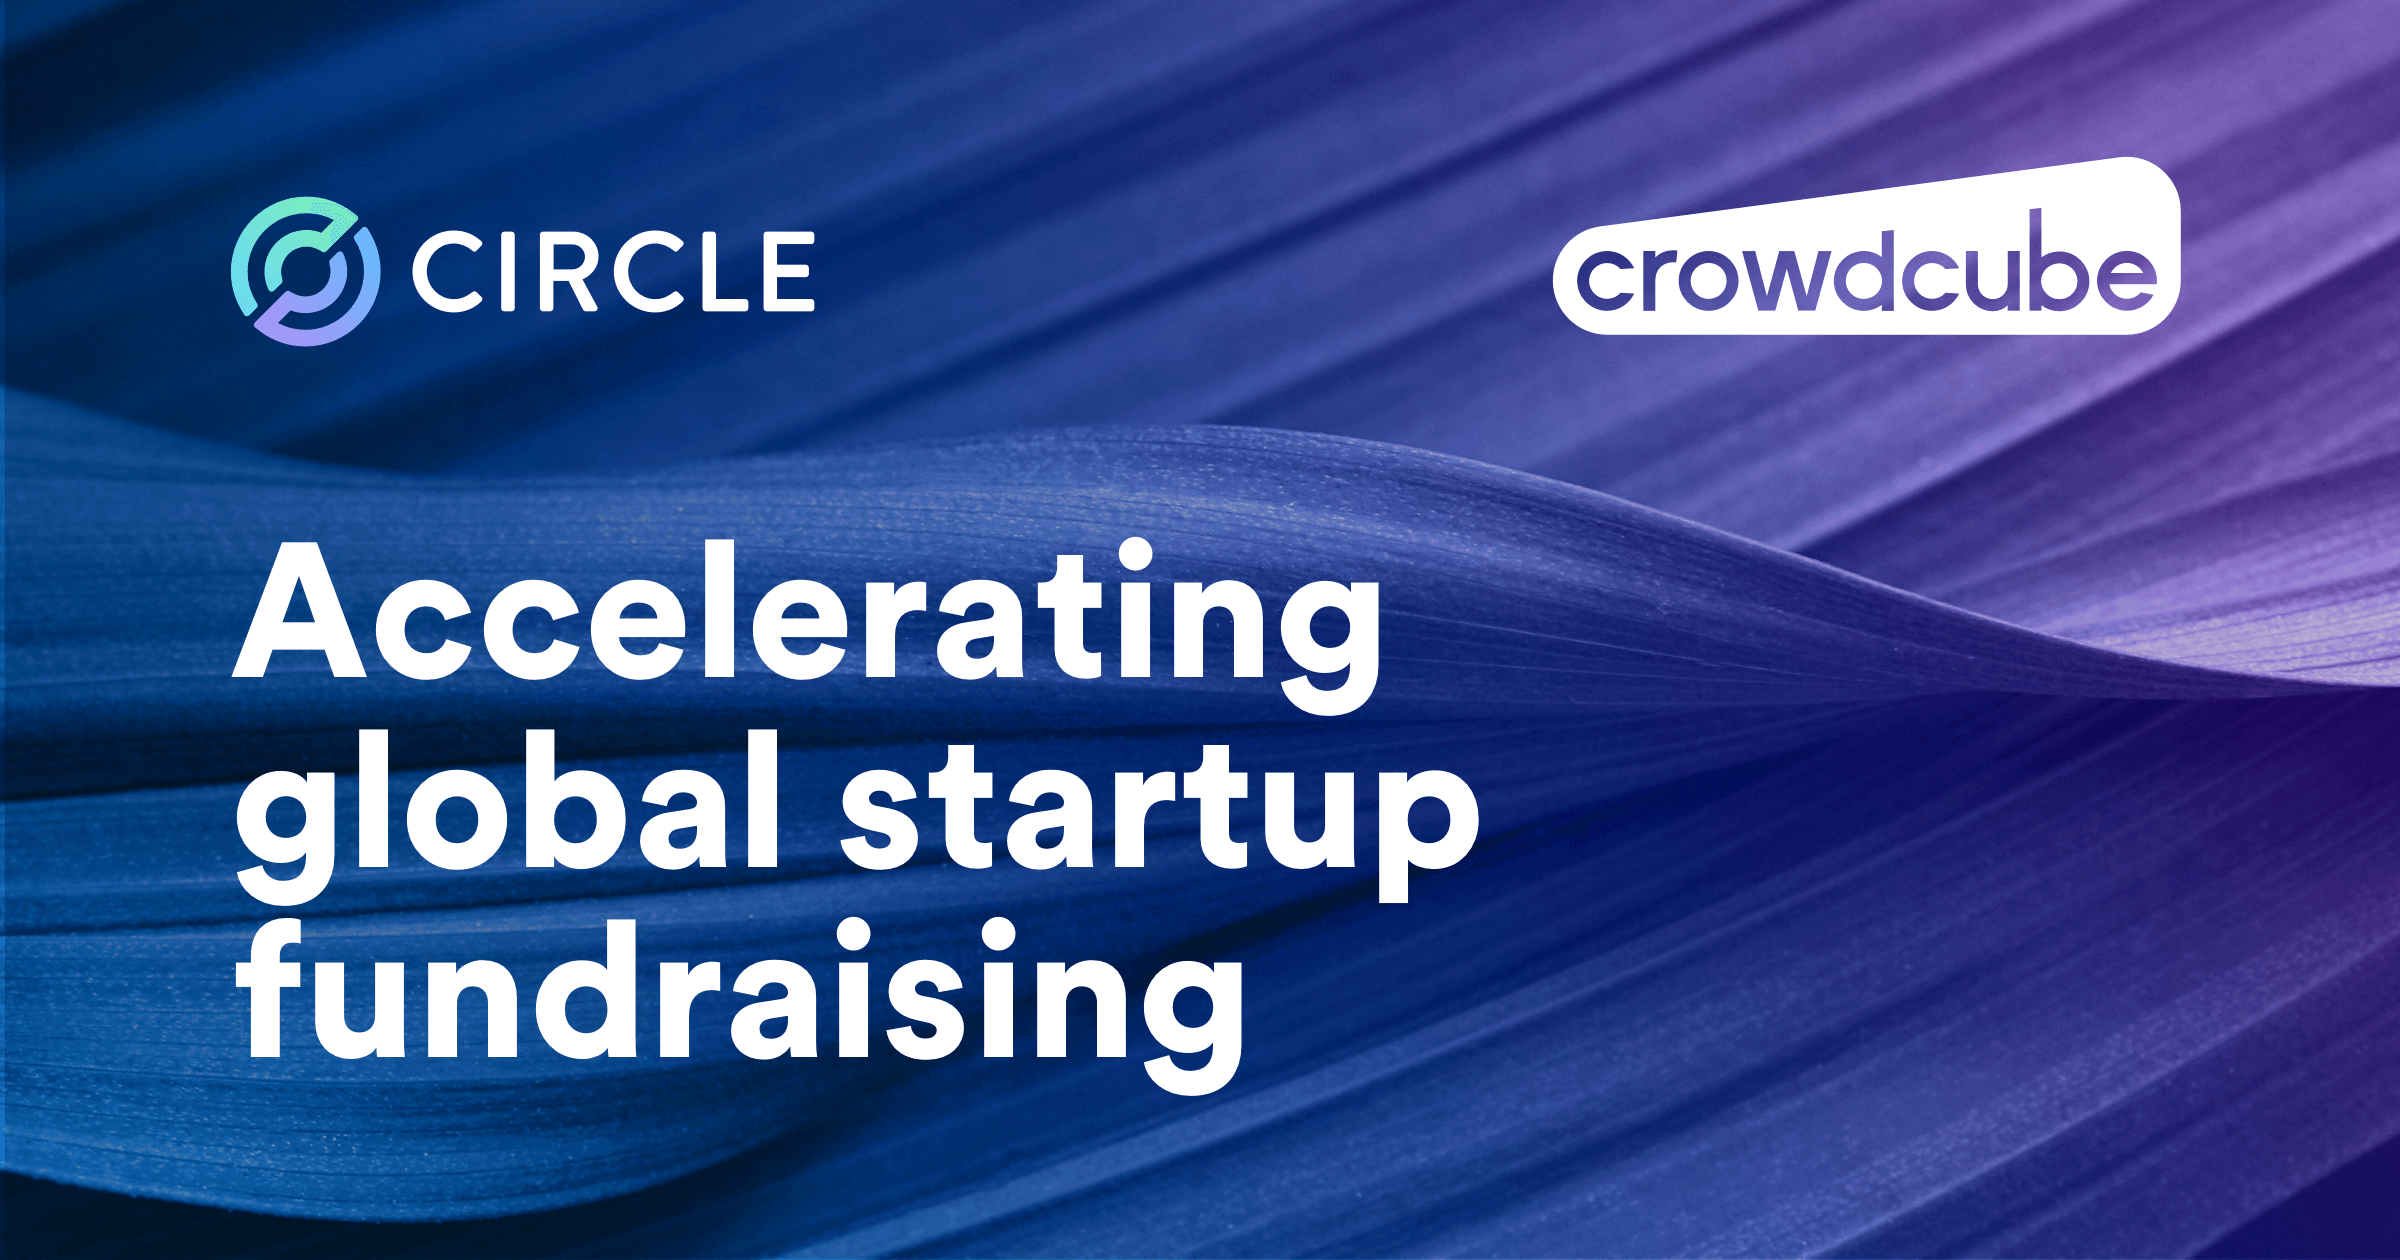 Circle Leads Investment into Crowdcube to Accelerate Global Digital Startup Fundraising